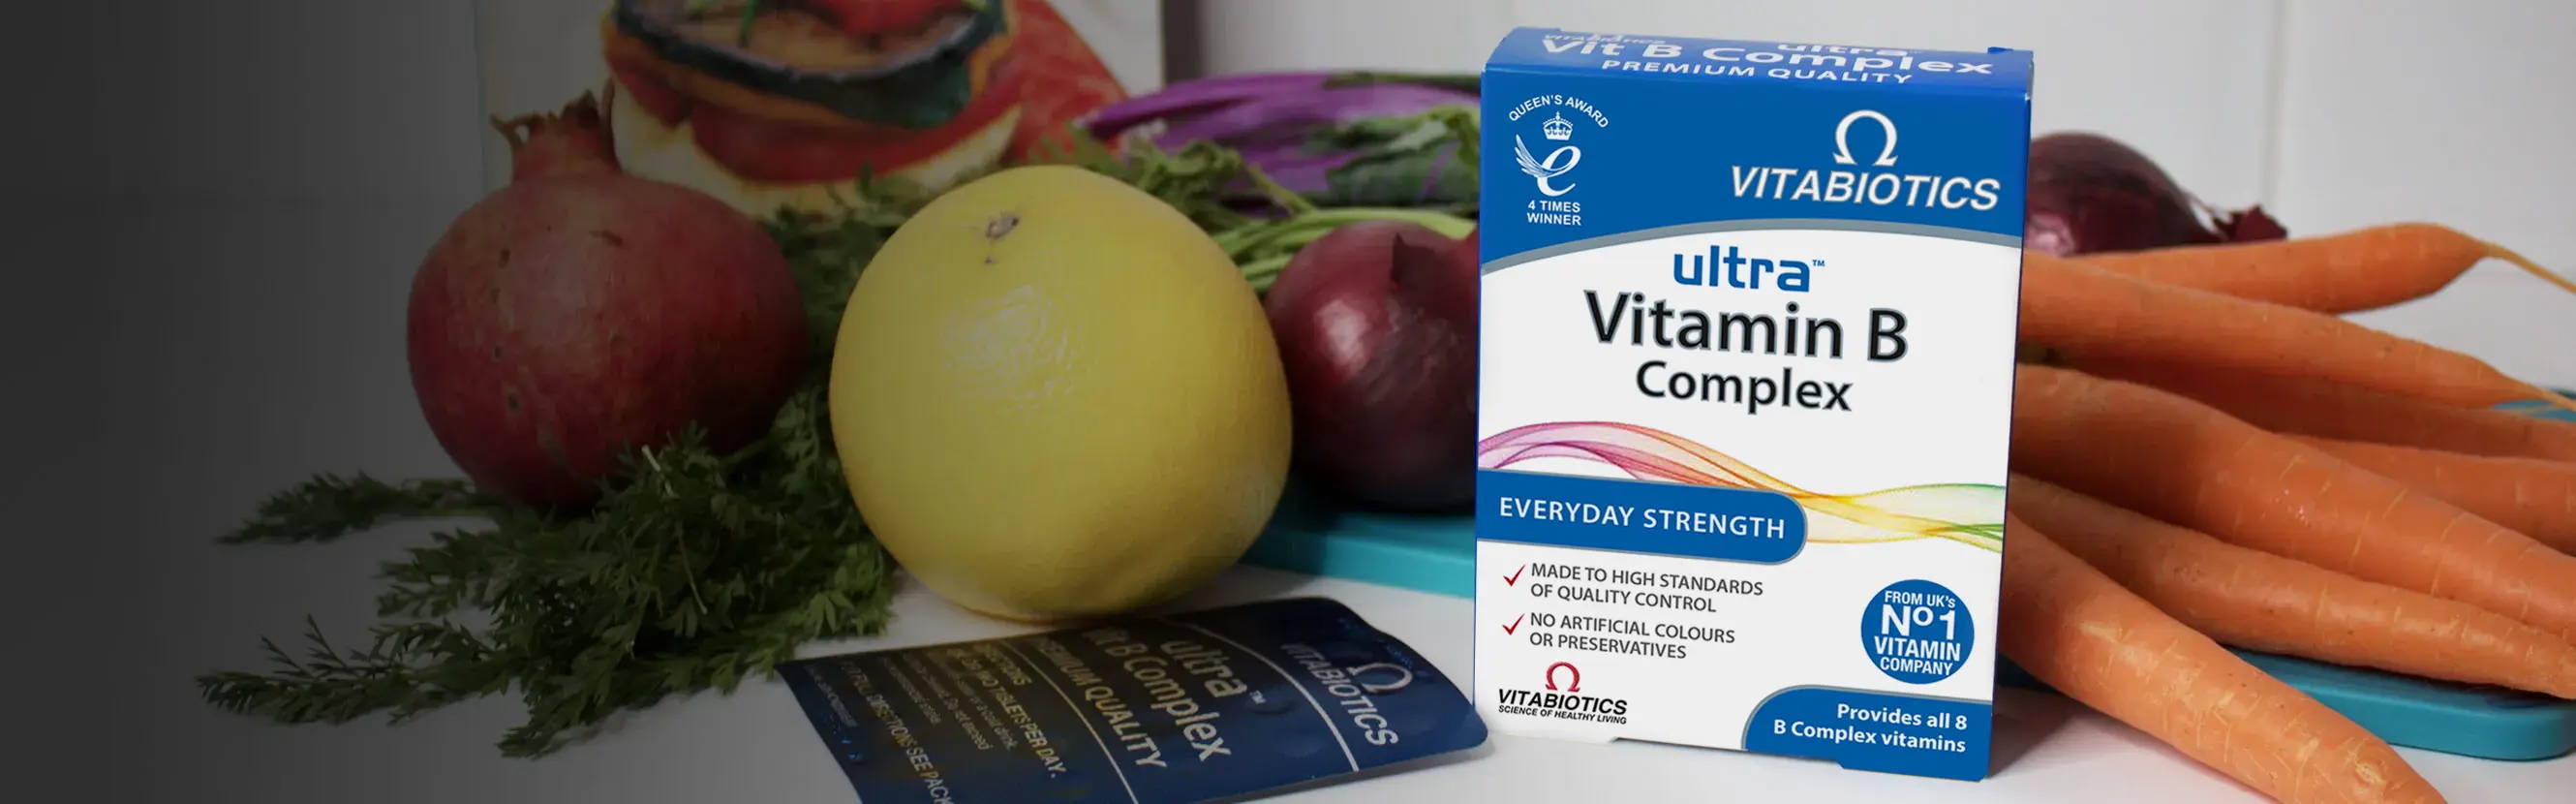  Are you getting all your B vitamins every day? Ultra Vitamin B Complex contains all 8 vitamins including thiamin which contributes to the normal function of the nervous system and pantothenic acid which contributes to the reduction of tiredness and fatigue. 